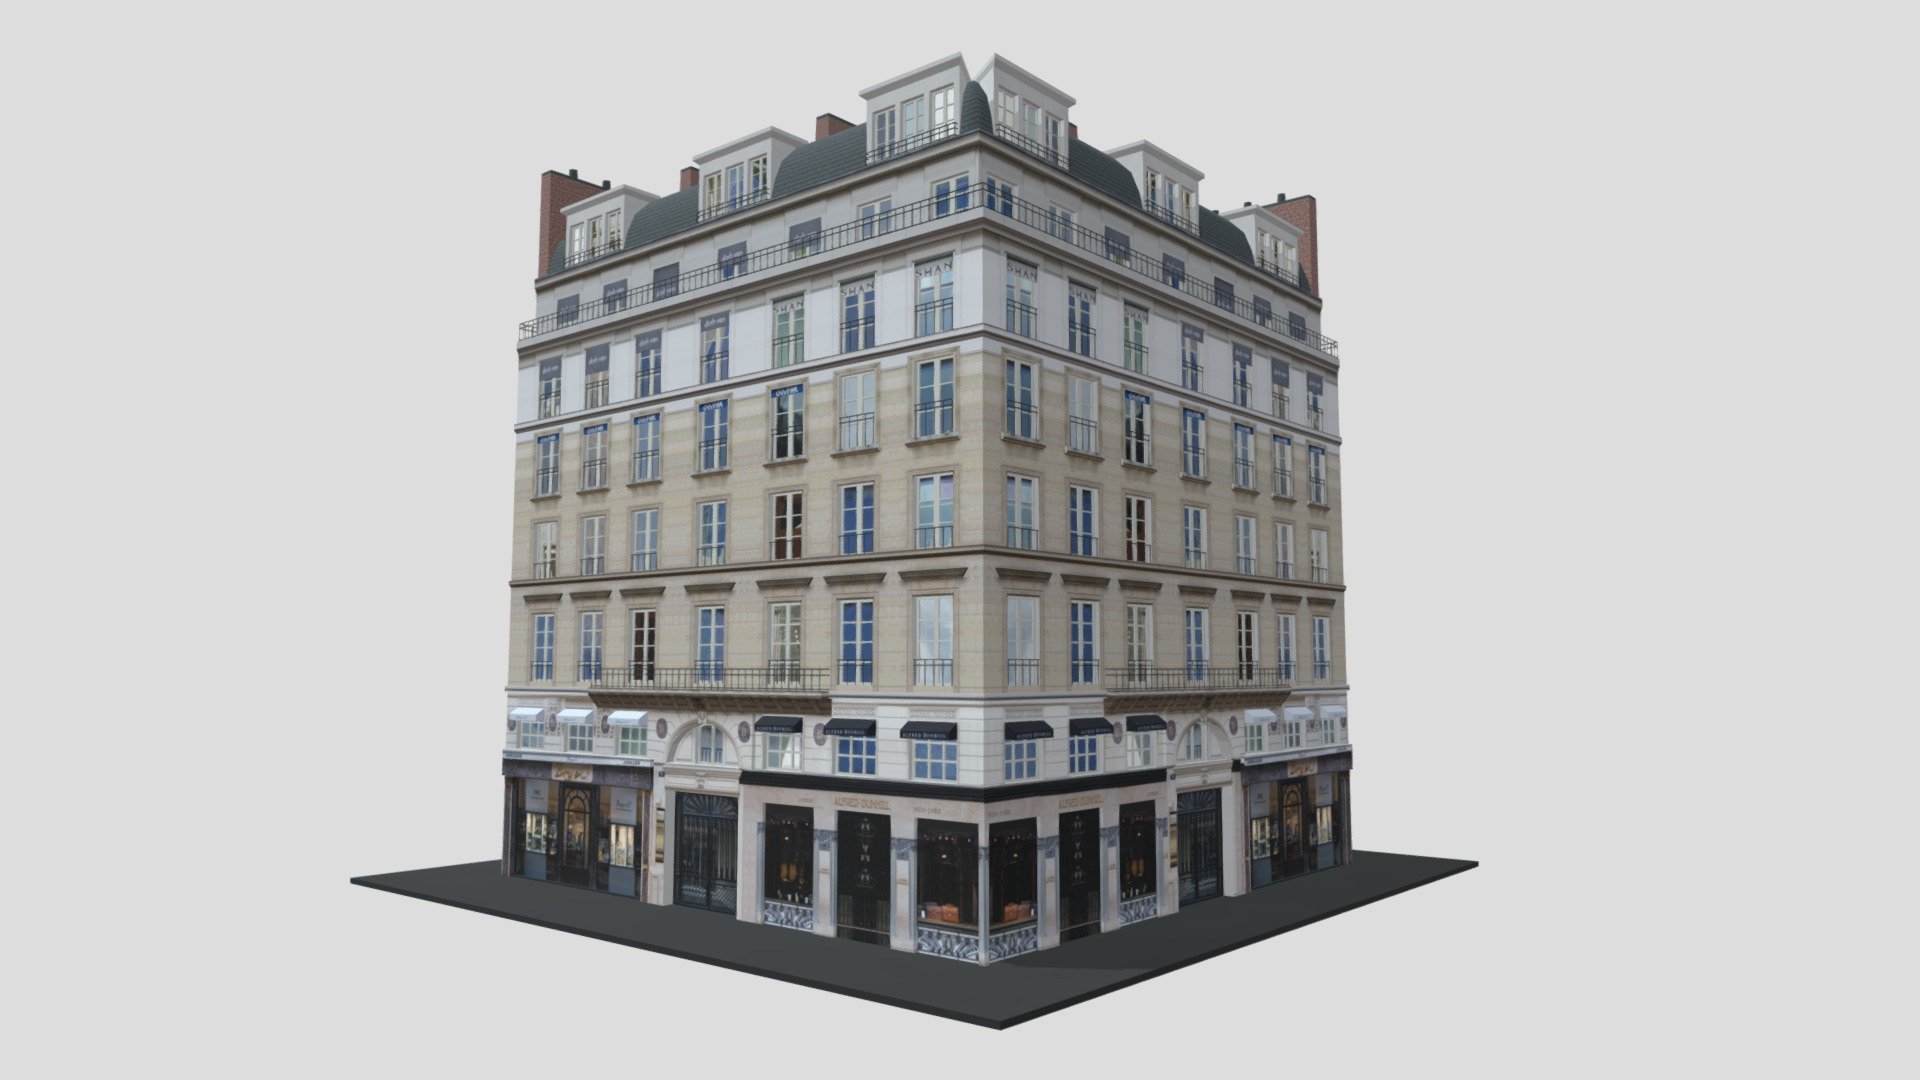 Typical Parisian Apartment Building 28
Originally created with 3ds Max 2015 and rendered in V-Ray 3.0. 

Total Poly Counts:
Poly Count = 13182
Vertex Count = 18350

https://nuralam3d.blogspot.com/2021/09/typical-parisian-apartment-building-28.html - Typical Parisian Apartment Building 28 - 3D model by nuralam018 3d model